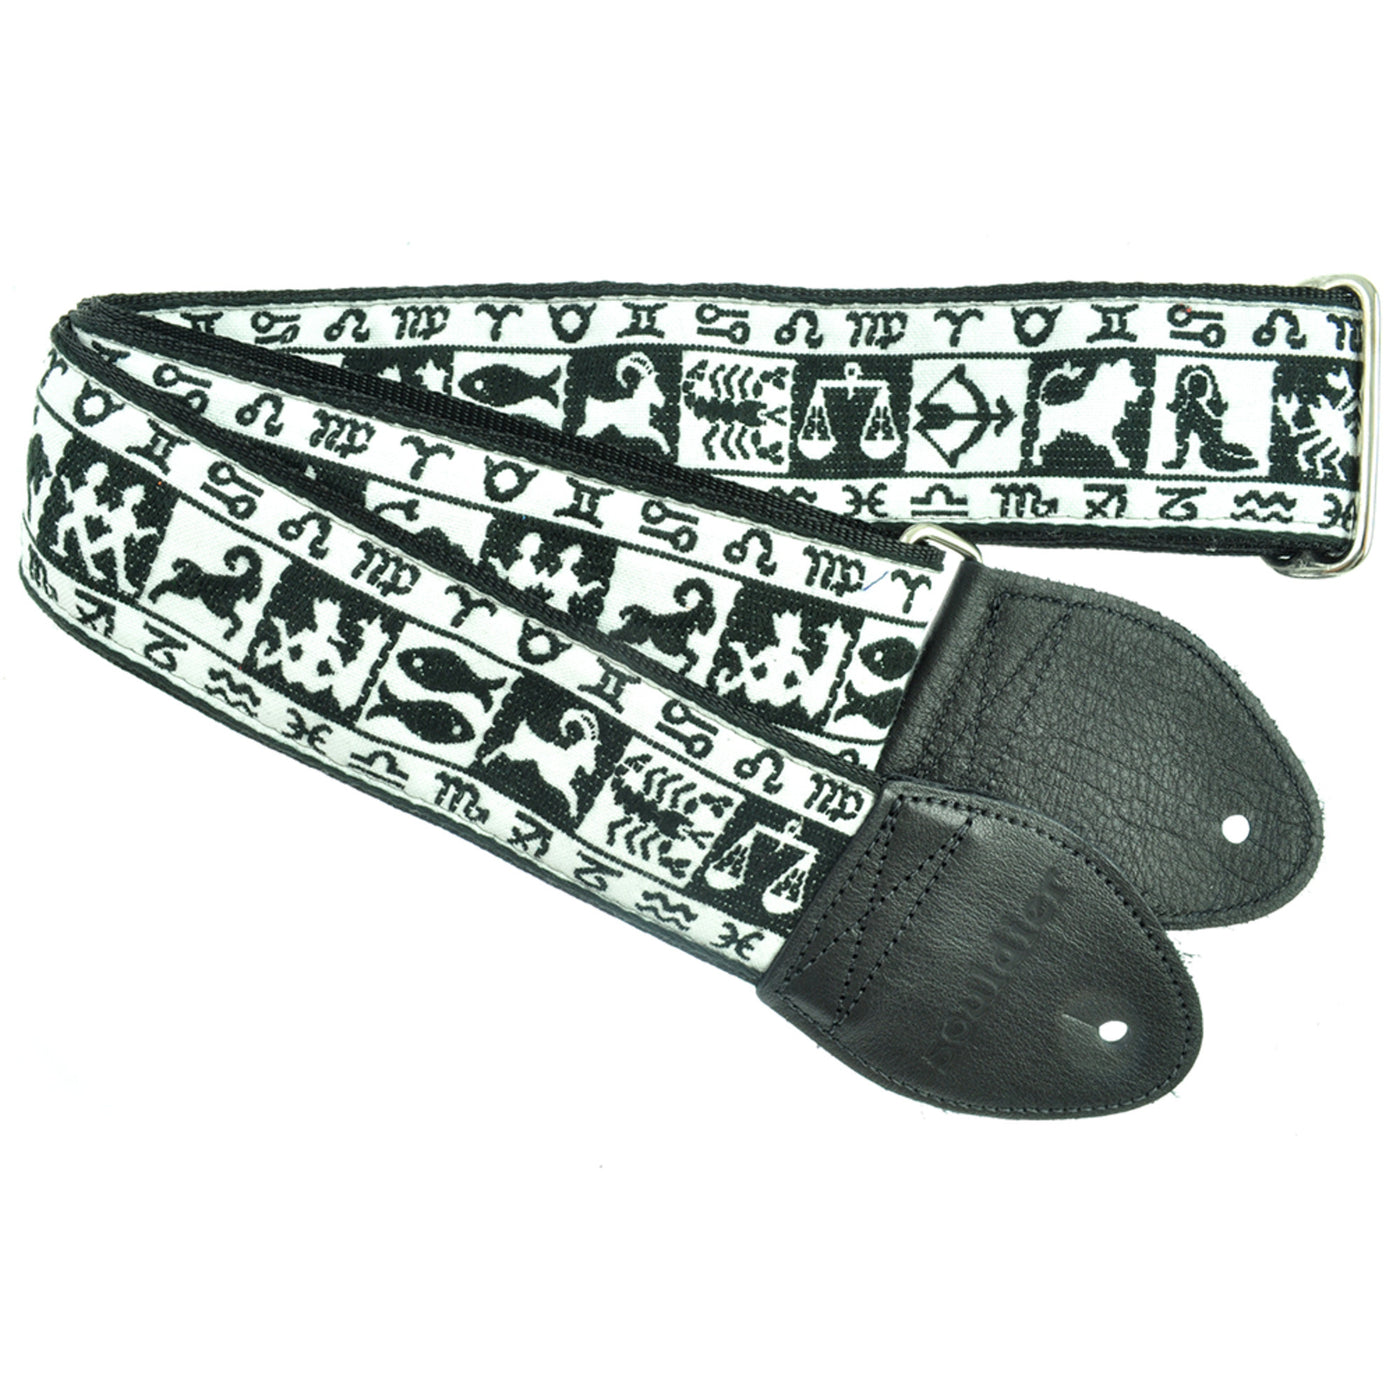 Souldier GS0352BK02BK - Handmade Seatbelt Guitar Strap for Bass, Electric or Acoustic Guitar, 2 Inches Wide and Adjustable Length from 30" to 63"  Made in the USA, Zodiac, Black and White